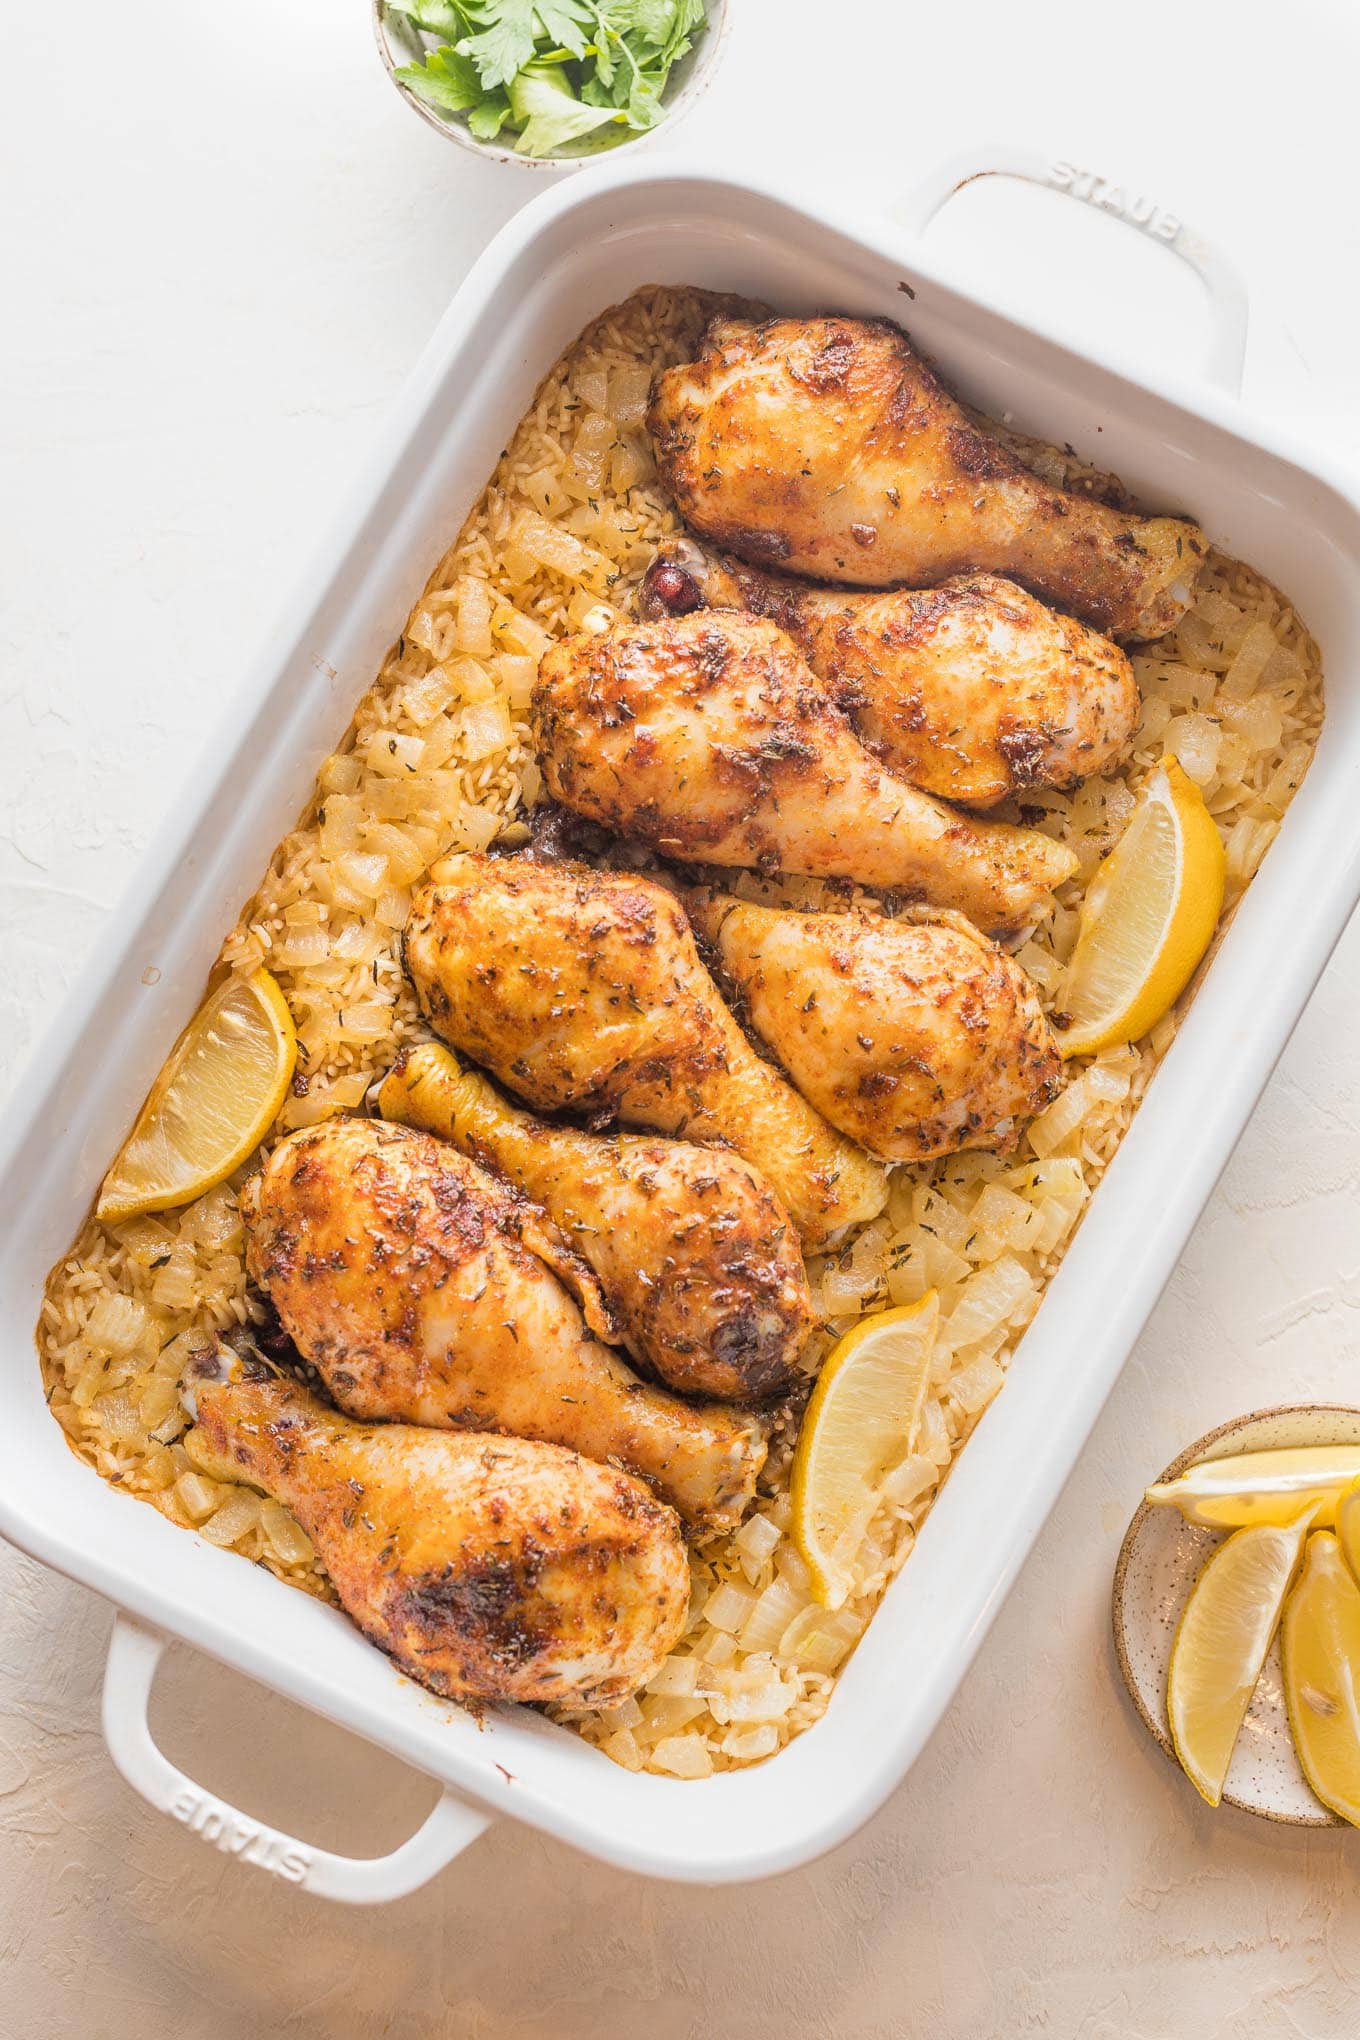 Baked chicken legs and rice.